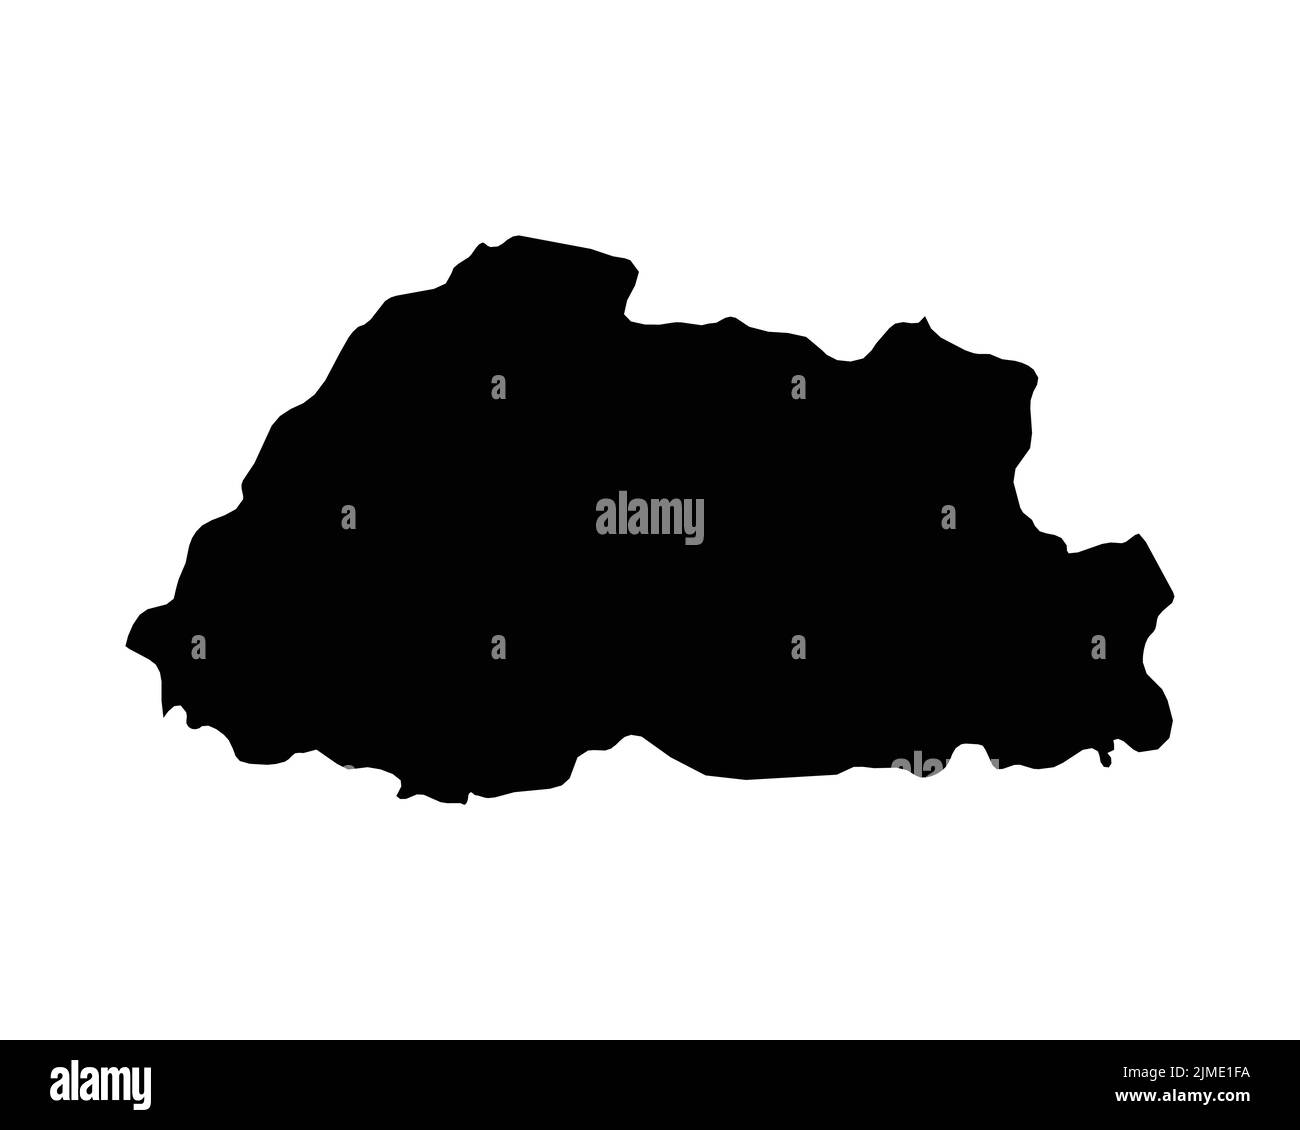 Bhutan Map. Bhutanese Country Map. Black and White National Outline Border Boundary Shape Geography Territory EPS Vector Illustration Clipart Stock Vector